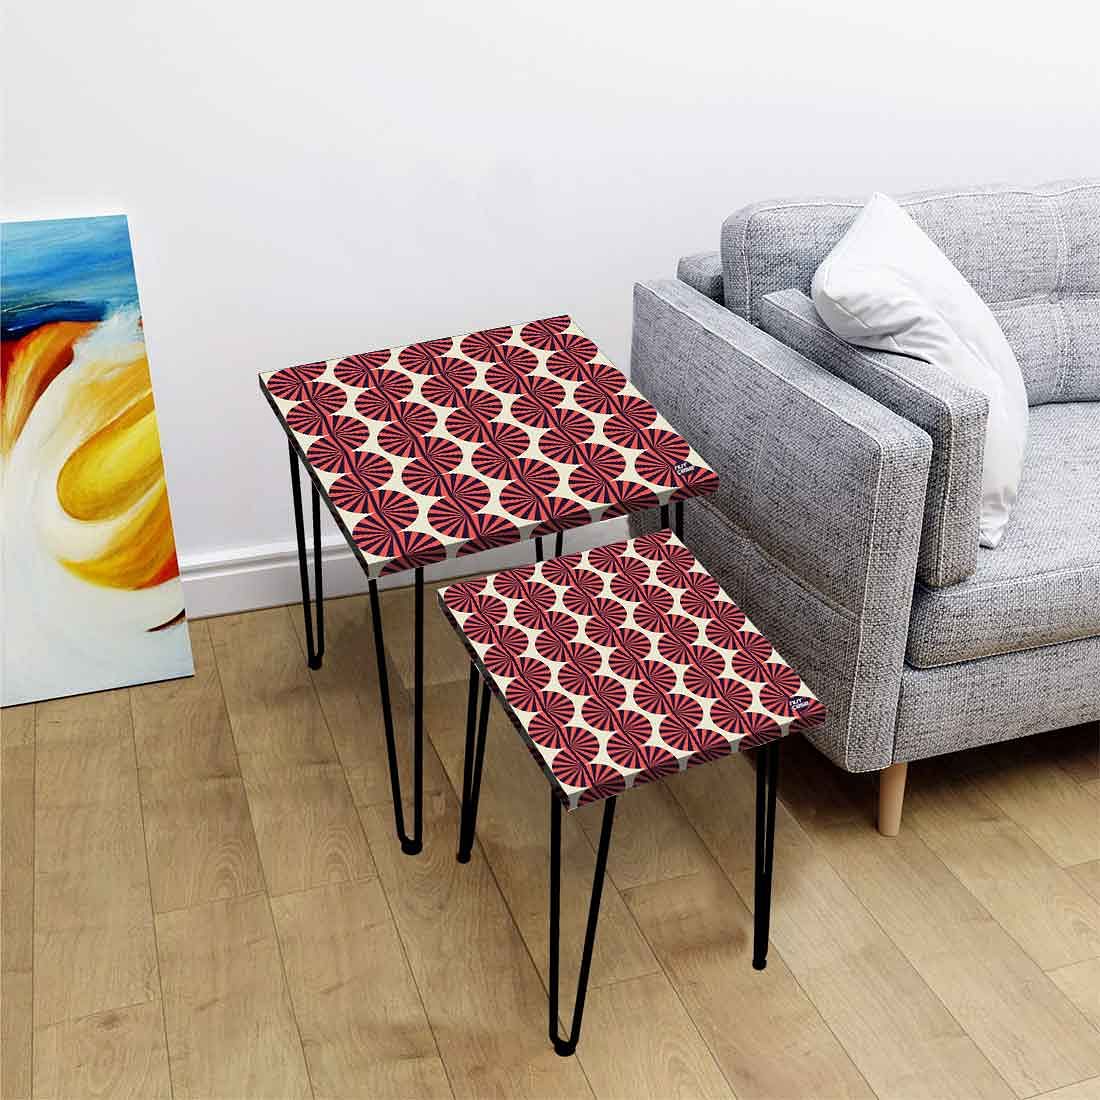 Patio Nesting Tables Set of 2 for Living Room Outdoors Home - Retro Pattern Nutcase